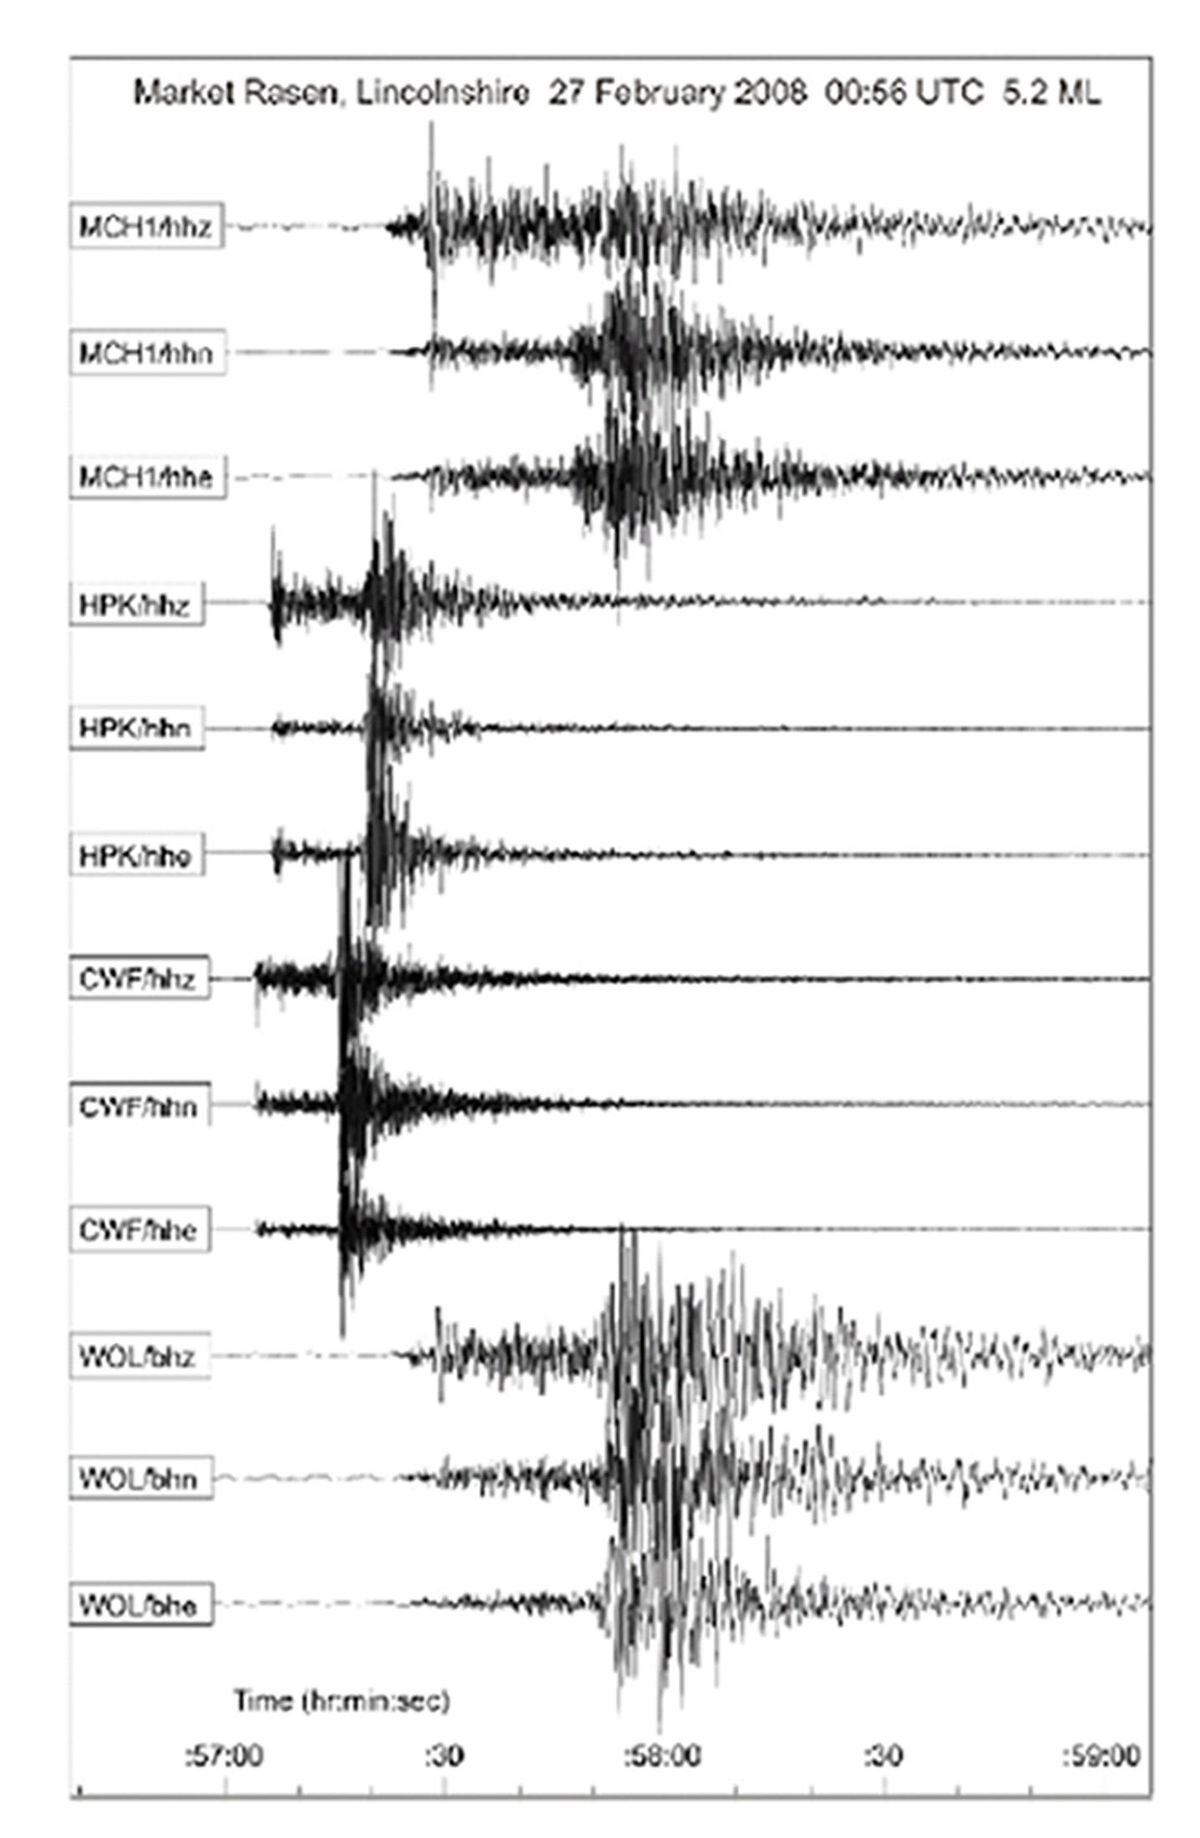 A British Geological Survey seismogram showing the 2008 earthquake with a magnitude of 5.2 on the Richter scale.